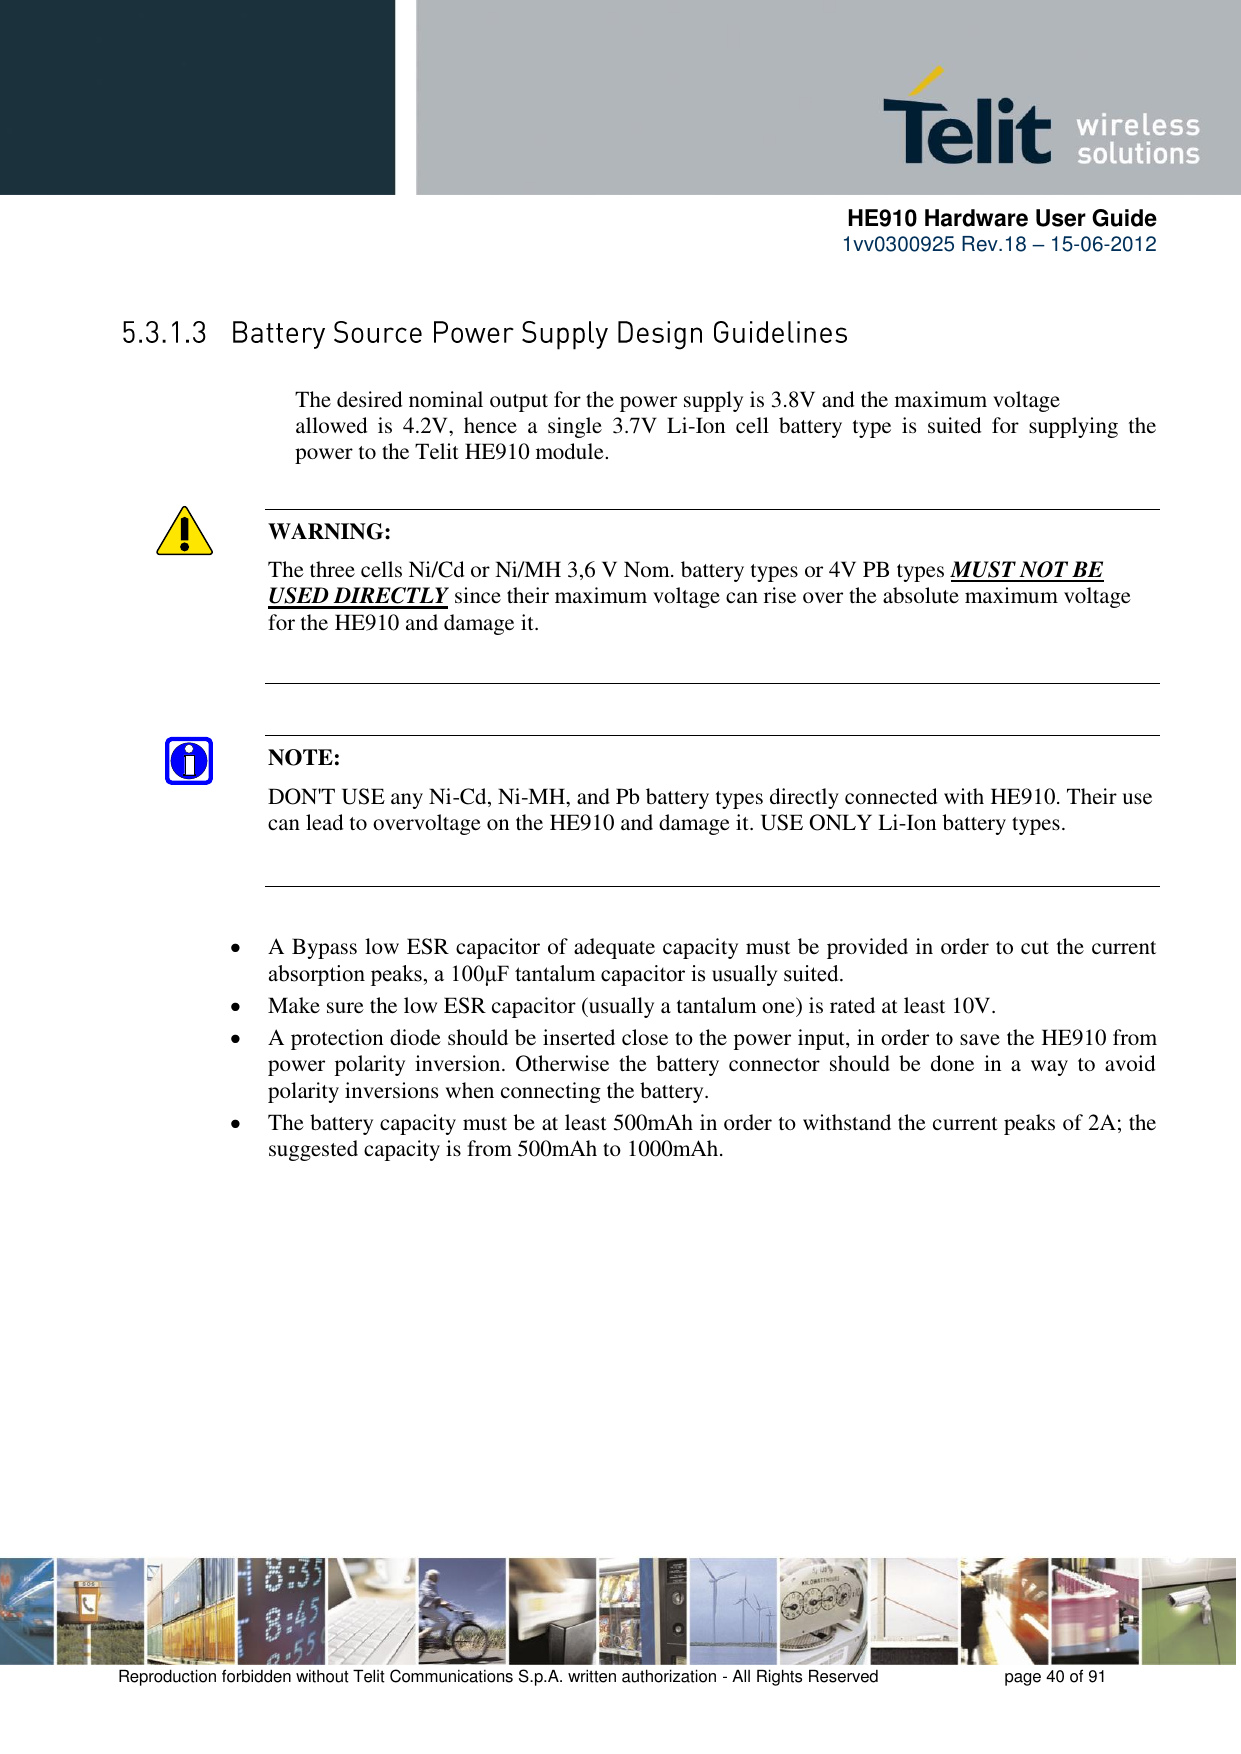      HE910 Hardware User Guide 1vv0300925 Rev.18 – 15-06-2012    Reproduction forbidden without Telit Communications S.p.A. written authorization - All Rights Reserved    page 40 of 91   The desired nominal output for the power supply is 3.8V and the maximum voltage      allowed  is  4.2V,  hence  a  single  3.7V  Li-Ion  cell  battery  type  is  suited  for  supplying  the     power to the Telit HE910 module.  WARNING: The three cells Ni/Cd or Ni/MH 3,6 V Nom. battery types or 4V PB types MUST NOT BE USED DIRECTLY since their maximum voltage can rise over the absolute maximum voltage for the HE910 and damage it.   NOTE: DON&apos;T USE any Ni-Cd, Ni-MH, and Pb battery types directly connected with HE910. Their use can lead to overvoltage on the HE910 and damage it. USE ONLY Li-Ion battery types.  A Bypass low ESR capacitor of adequate capacity must be provided in order to cut the current absorption peaks, a 100μF tantalum capacitor is usually suited.  Make sure the low ESR capacitor (usually a tantalum one) is rated at least 10V.  A protection diode should be inserted close to the power input, in order to save the HE910 from power  polarity inversion. Otherwise the battery connector should  be  done  in a  way to  avoid polarity inversions when connecting the battery.  The battery capacity must be at least 500mAh in order to withstand the current peaks of 2A; the suggested capacity is from 500mAh to 1000mAh. 